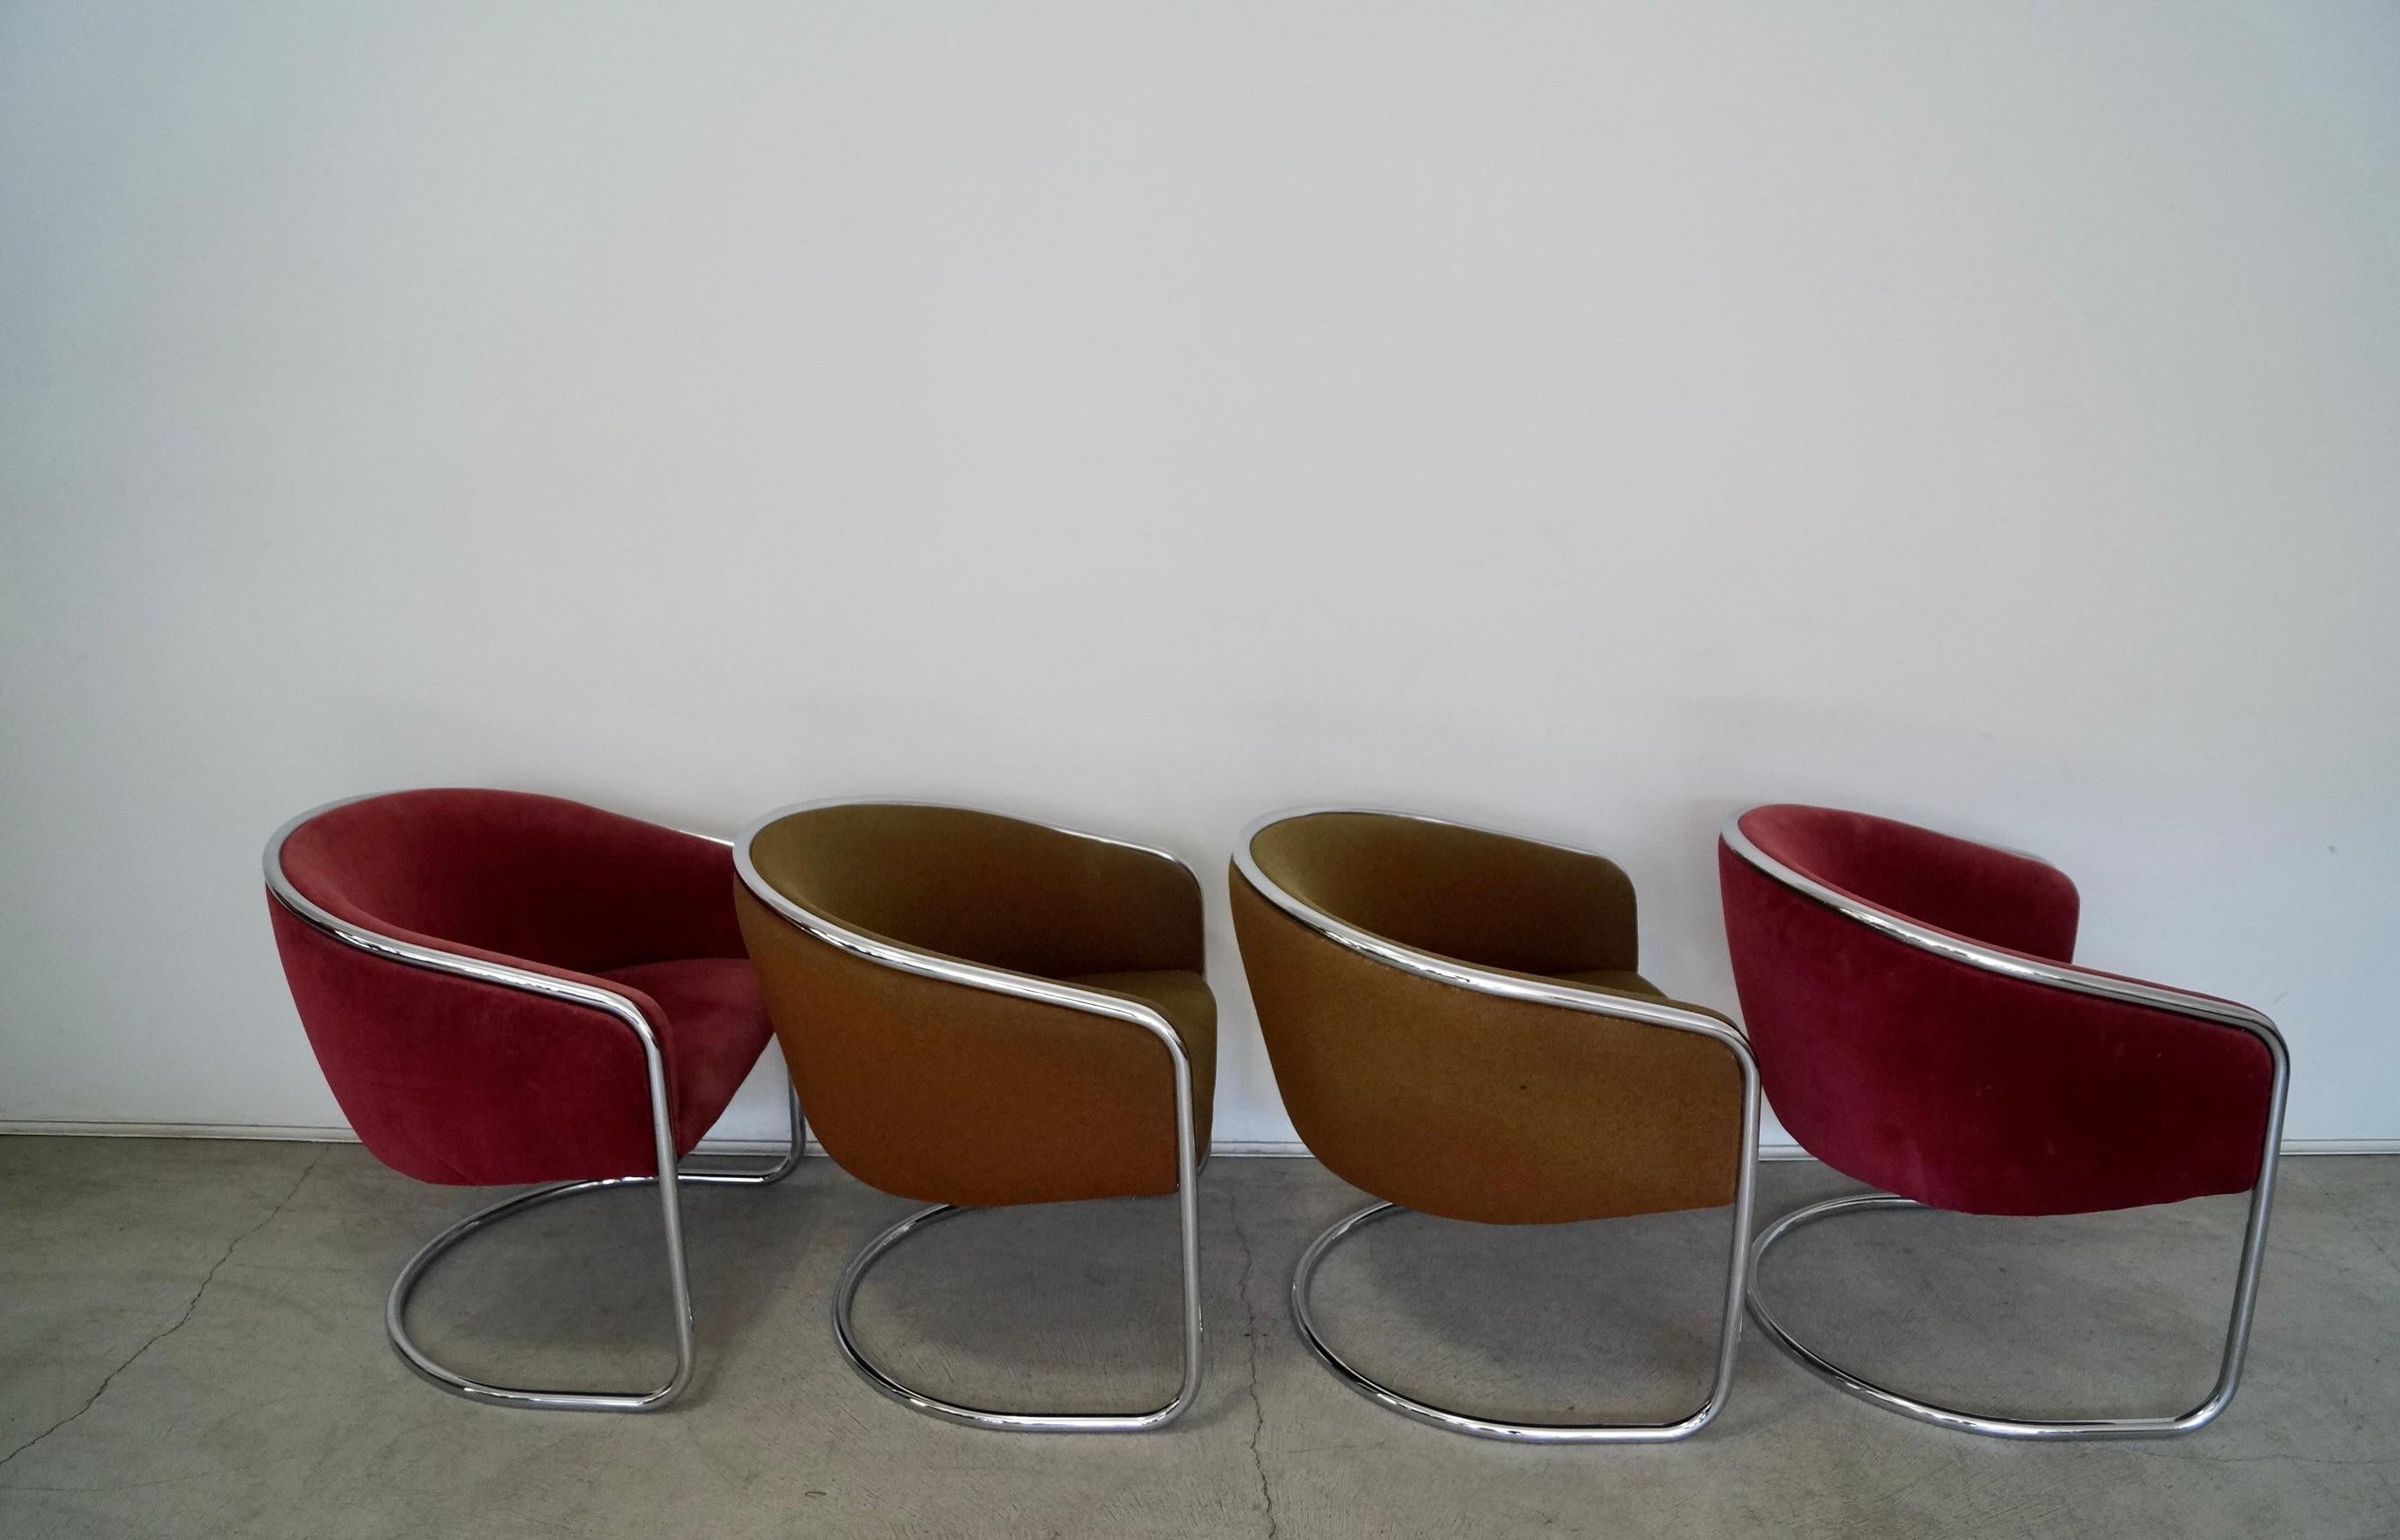 1970's Mid-Century Modern Thonet Chrome Armchairs - Set of Four For Sale 3